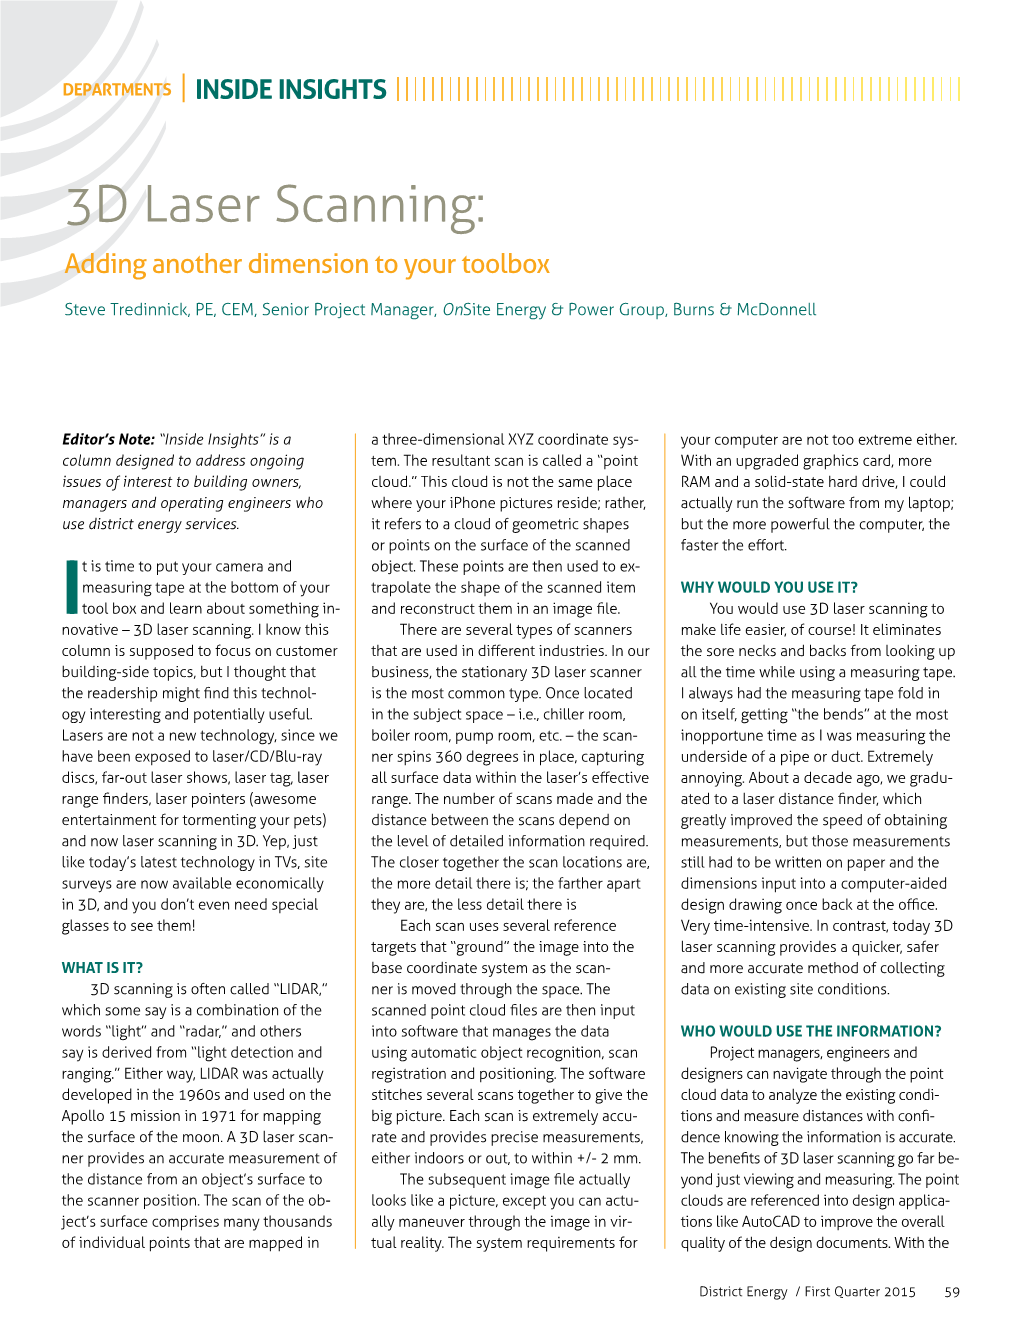 3D Laser Scanning: Adding Another Dimension to Your Toolbox